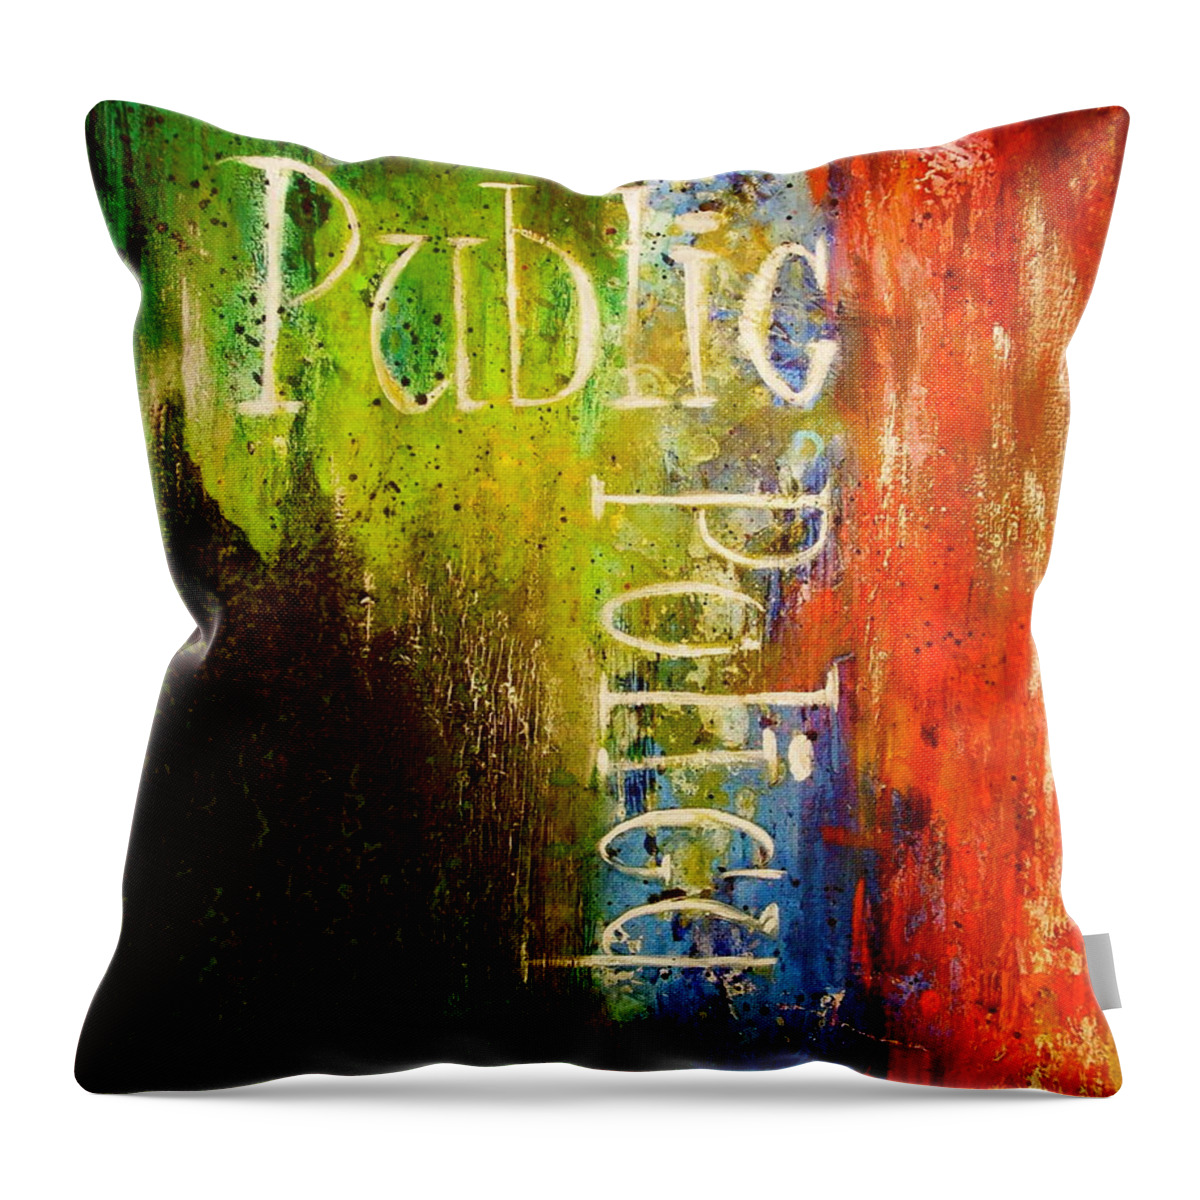 Abstract Art Throw Pillow featuring the painting Public Policy by Laura Pierre-Louis